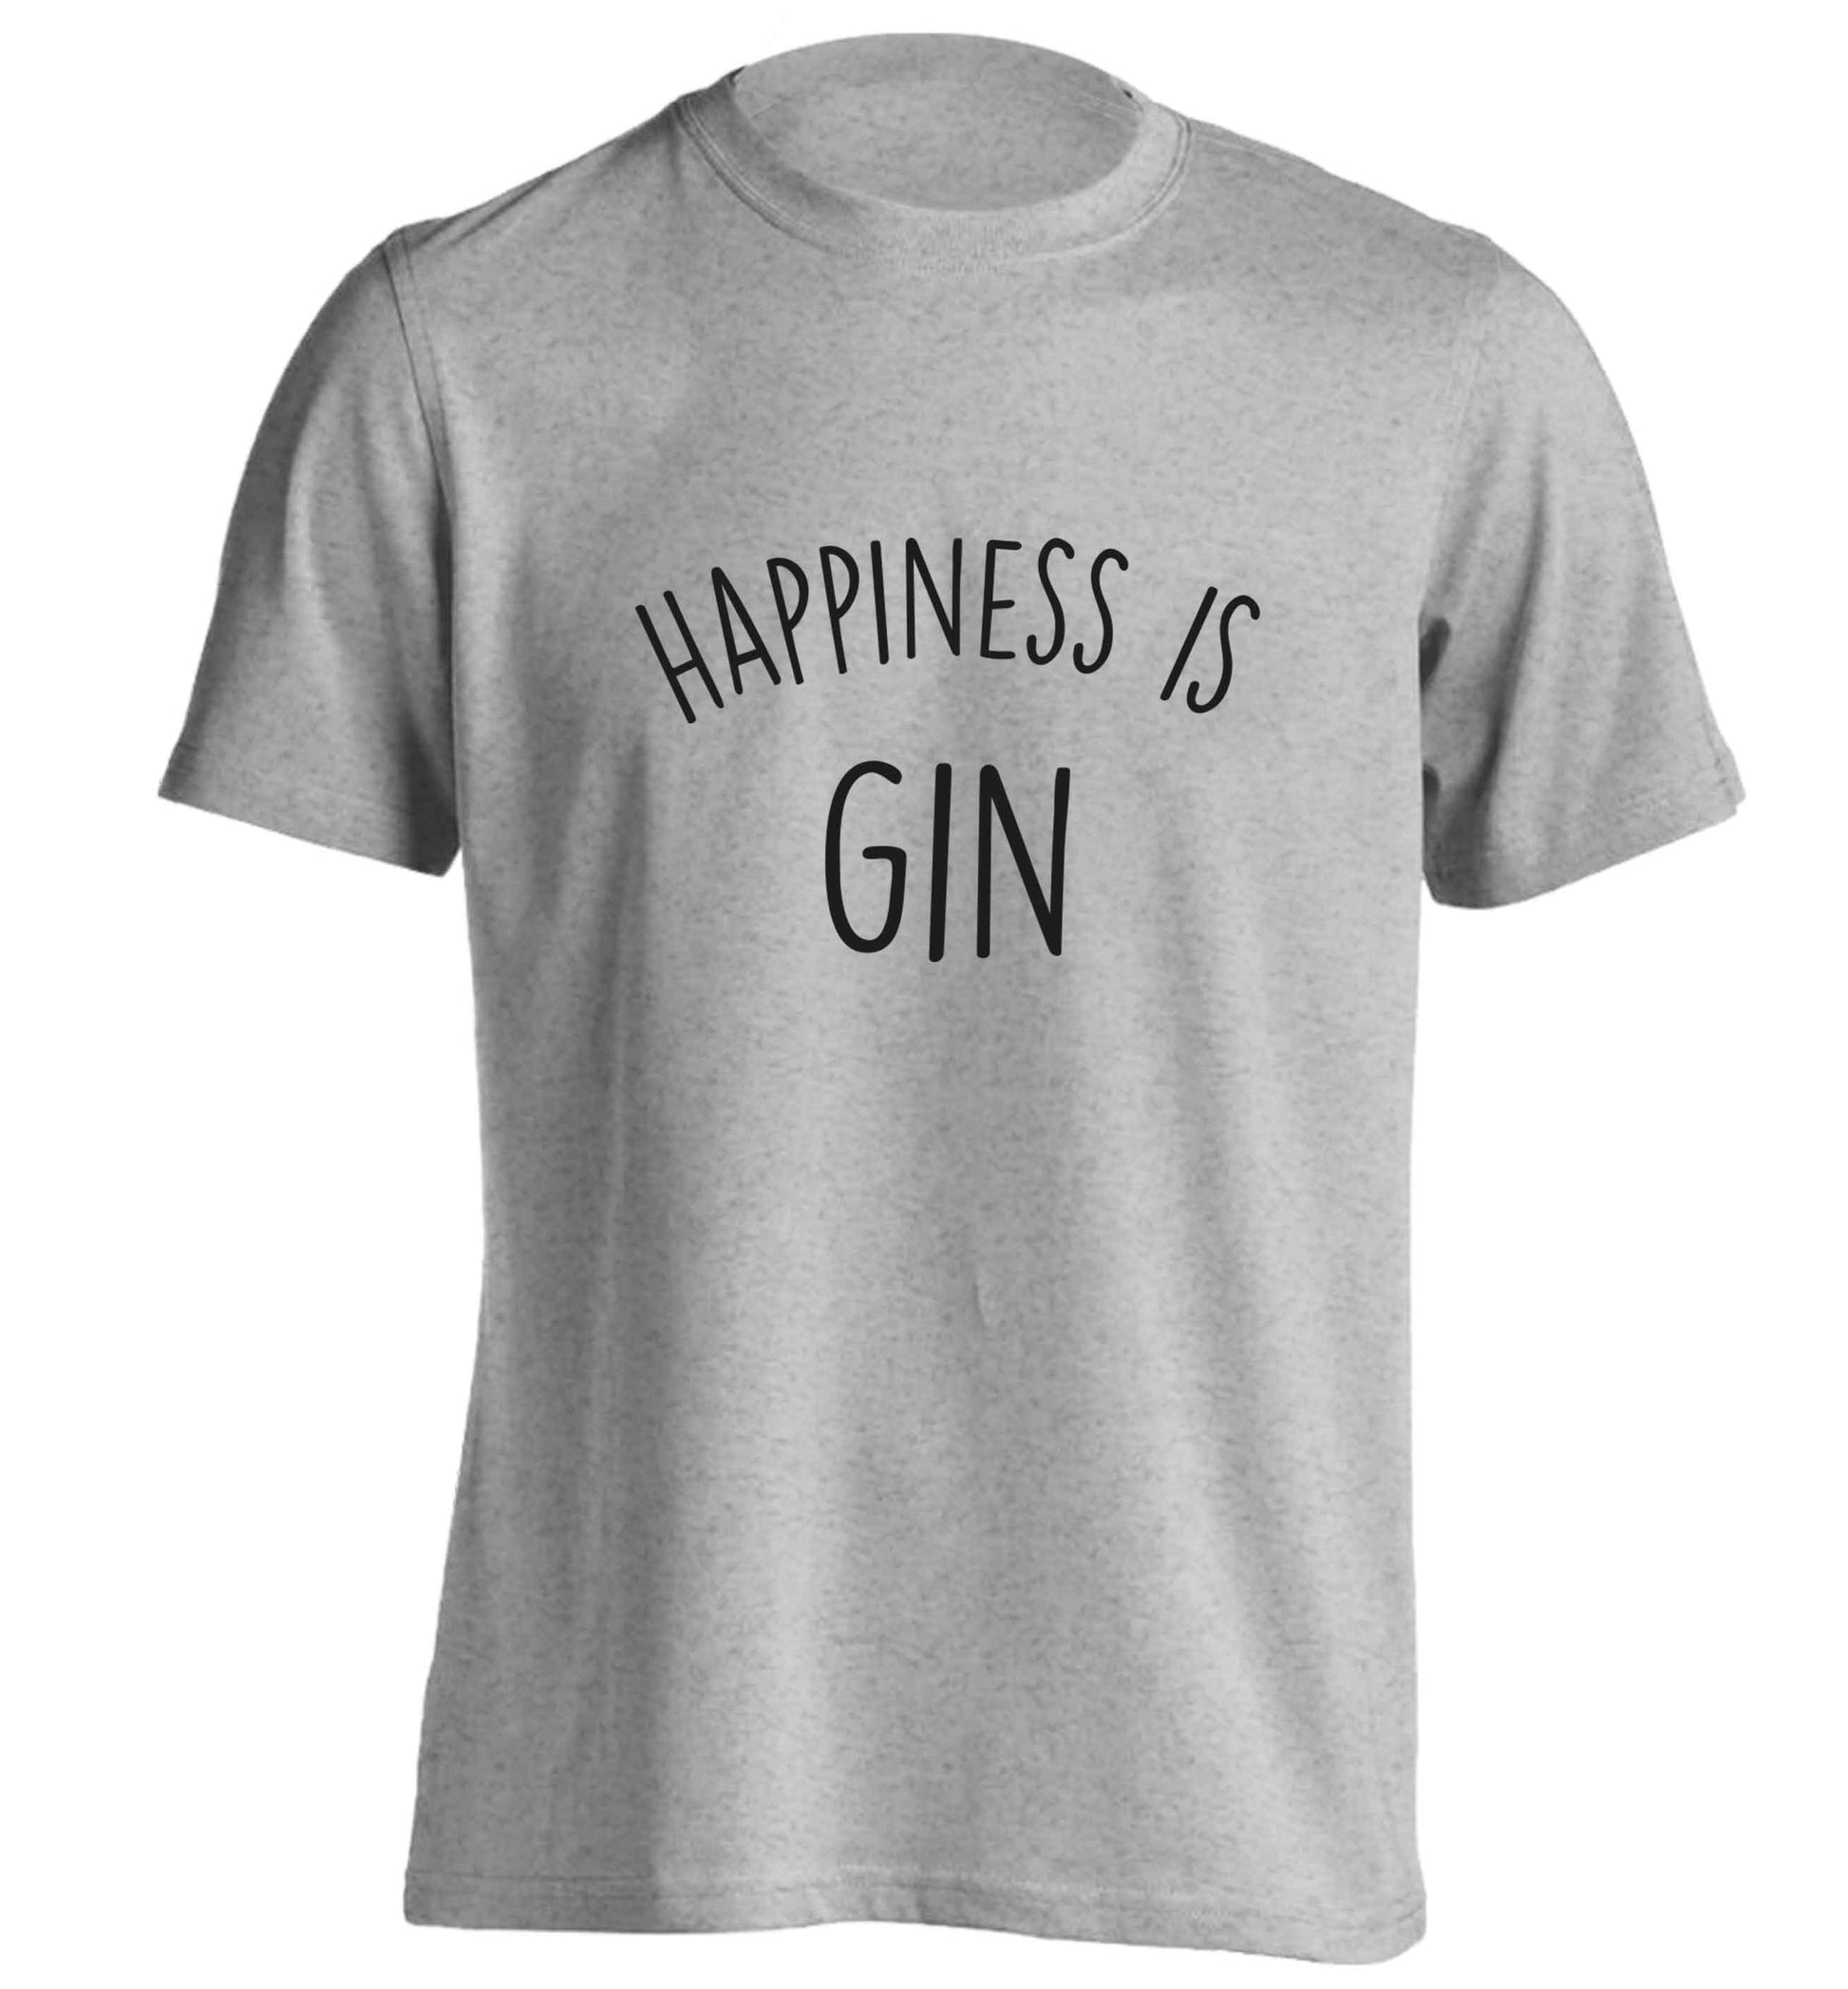 Happiness is gin adults unisex grey Tshirt 2XL